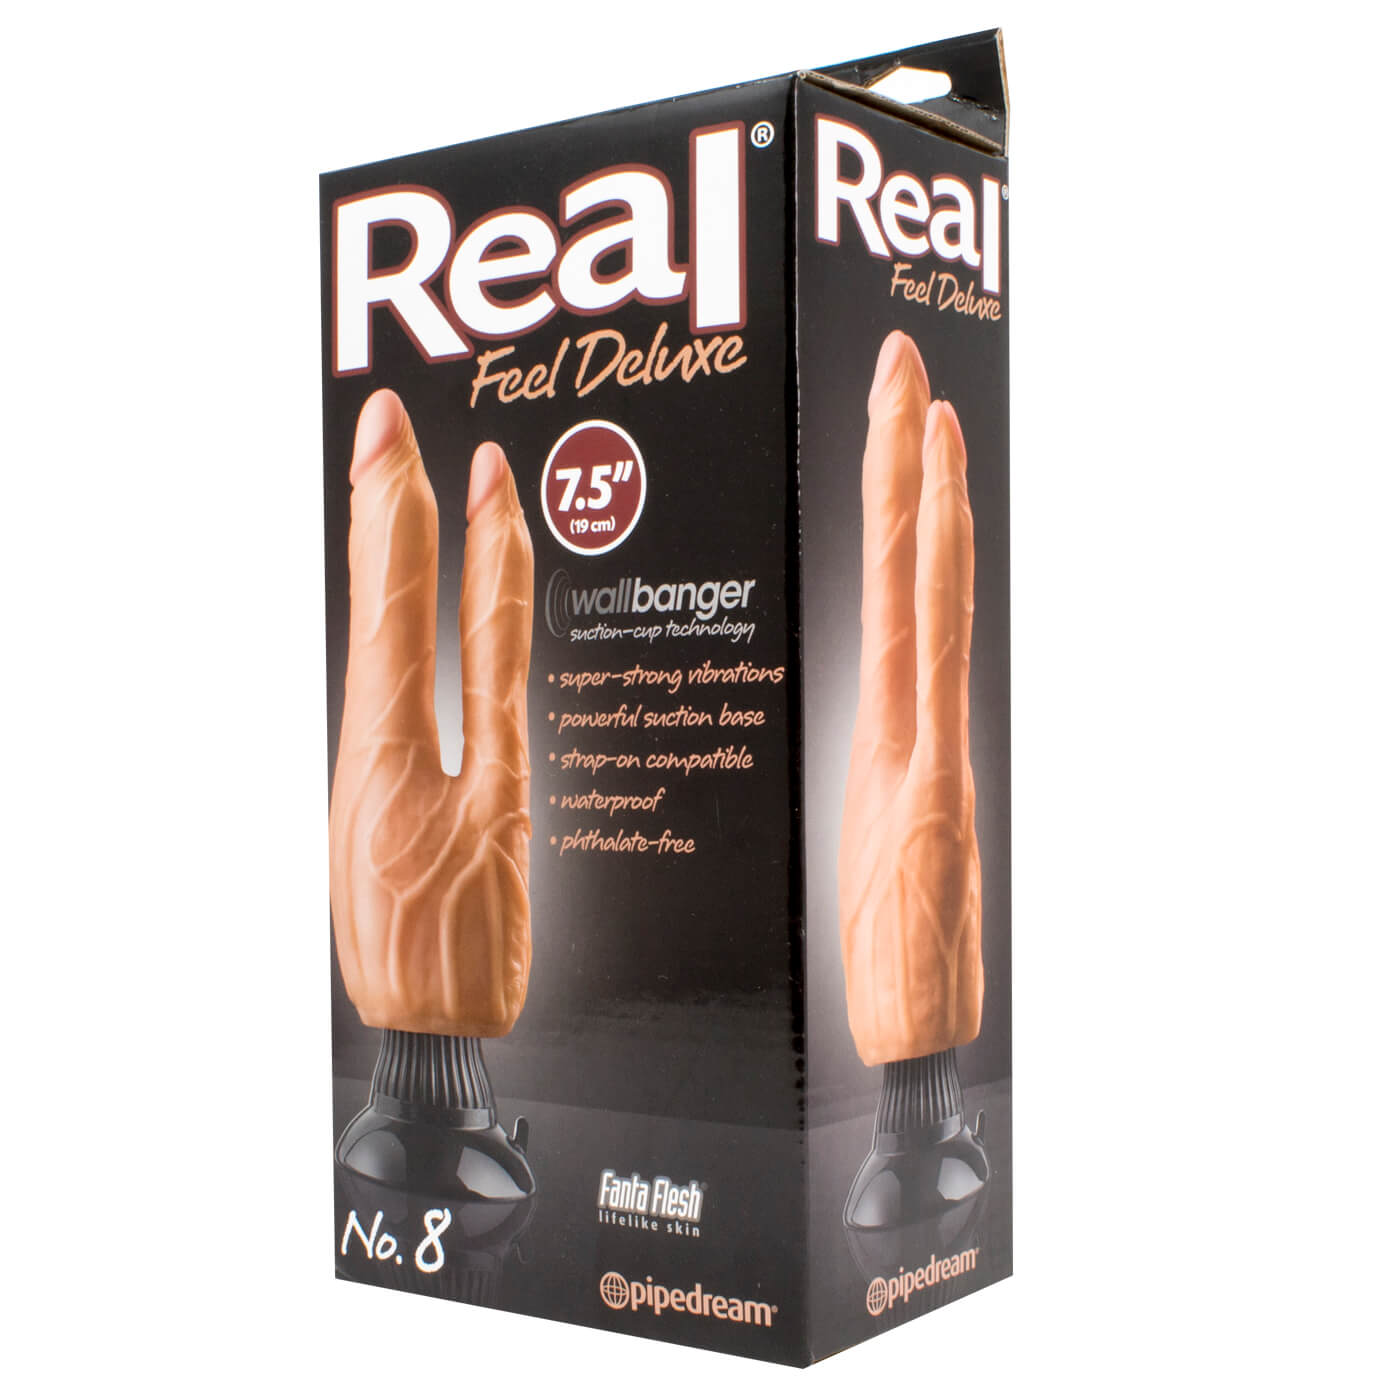 Real Feel Deluxe No.8 Dual-Probed Vibrating 7.5 Inch Suction Dildo